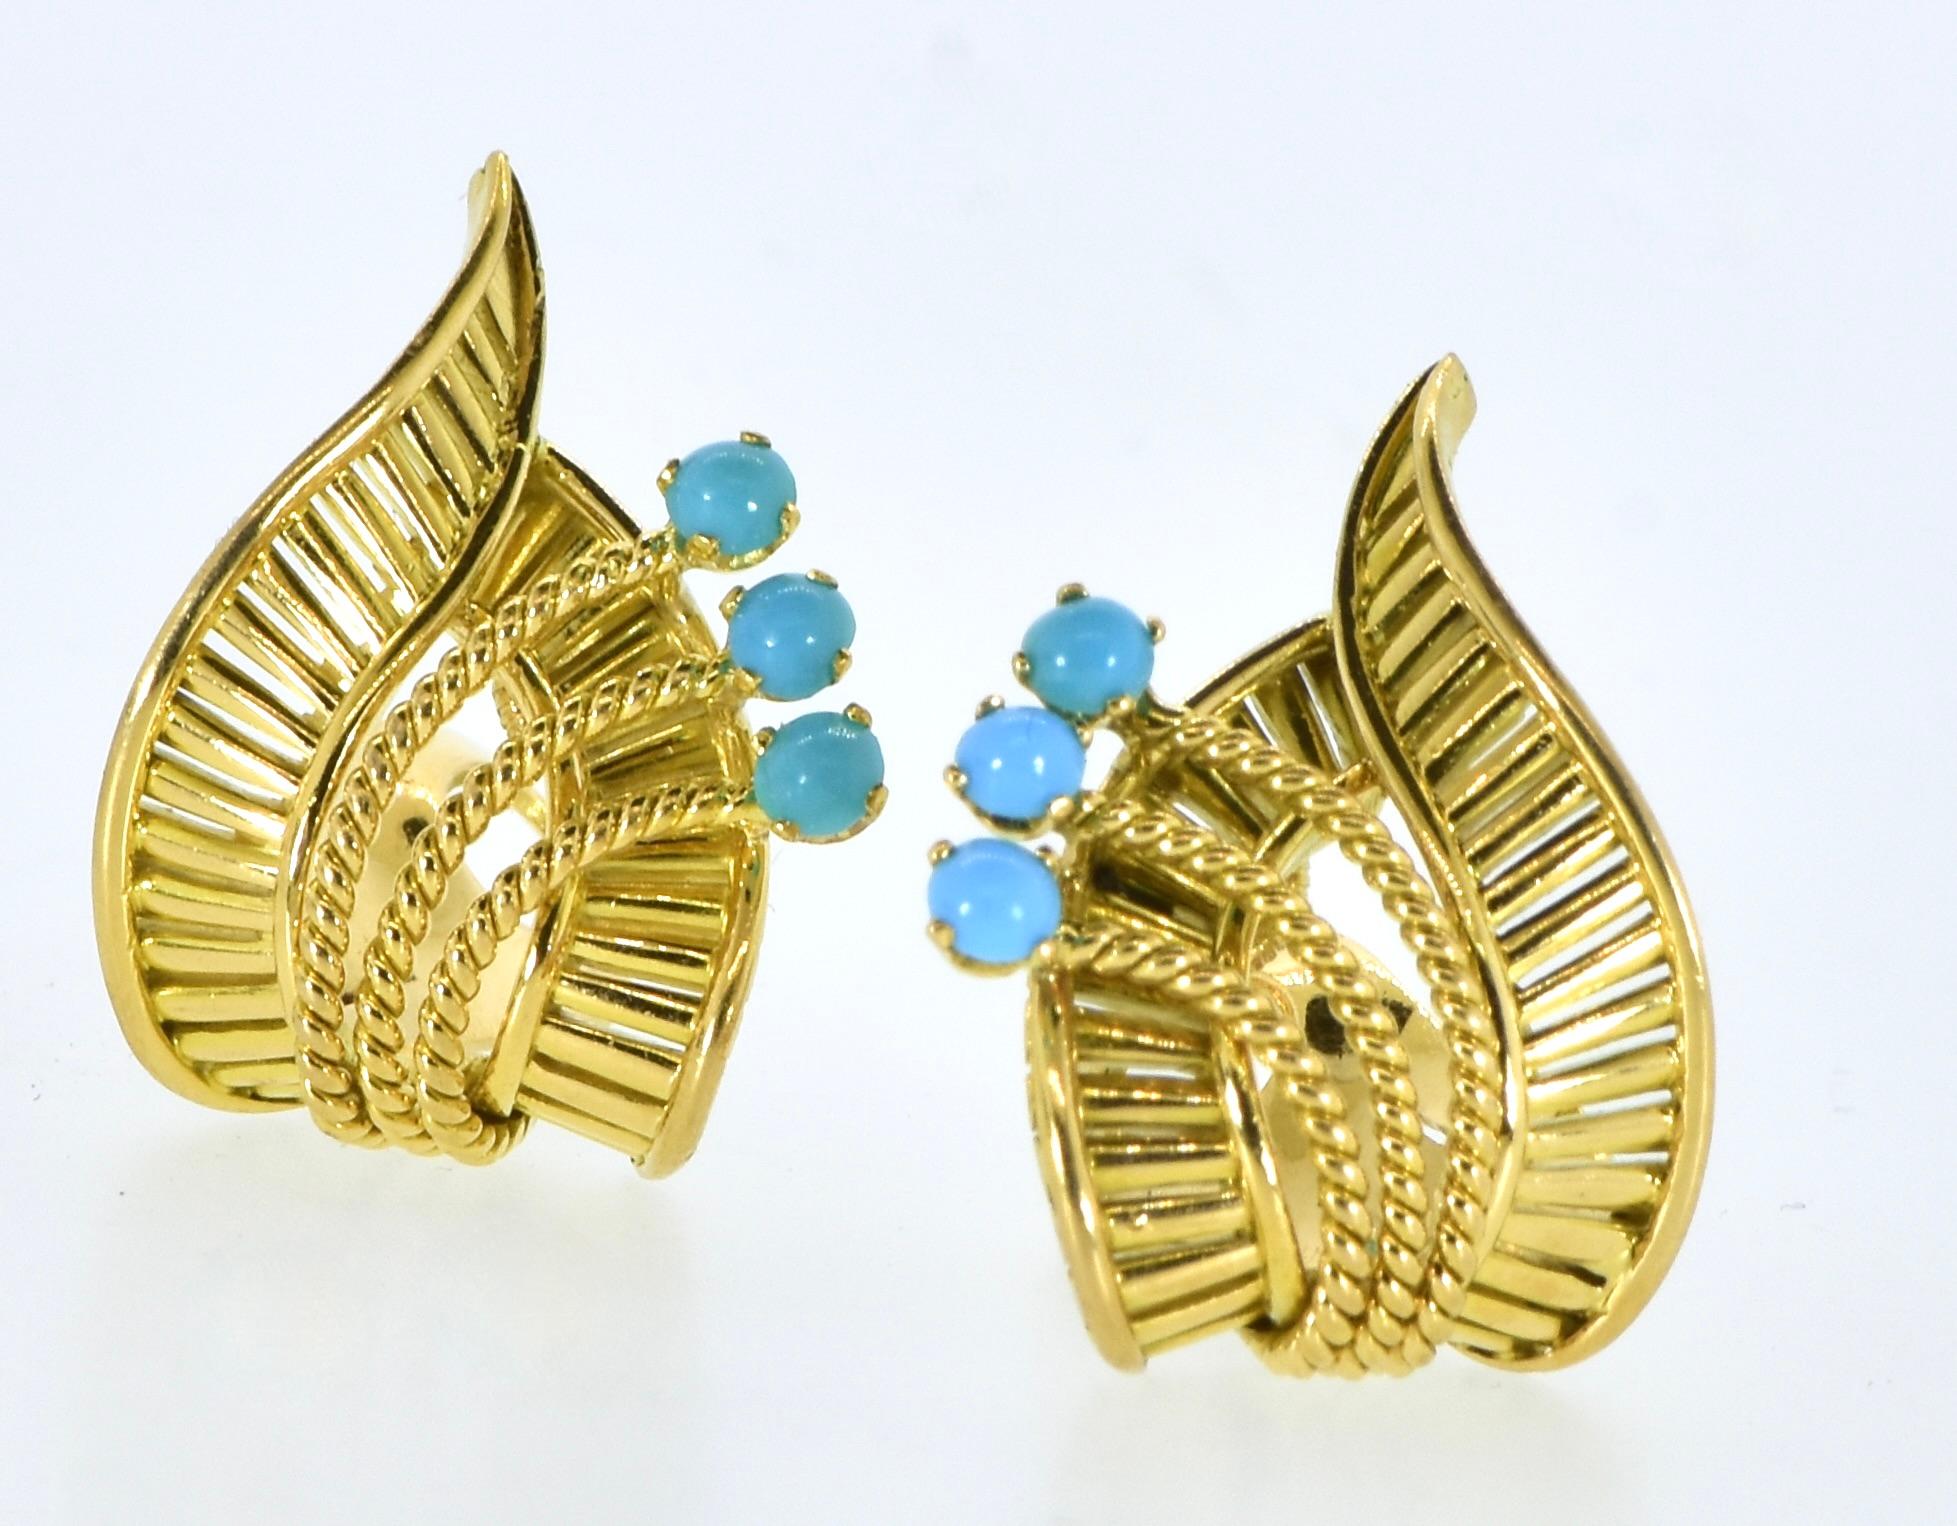 18K Yellow Gold Earrings with Fine Turquoise in a Leaf Motif, Vintage , c. 1950. For Sale 1